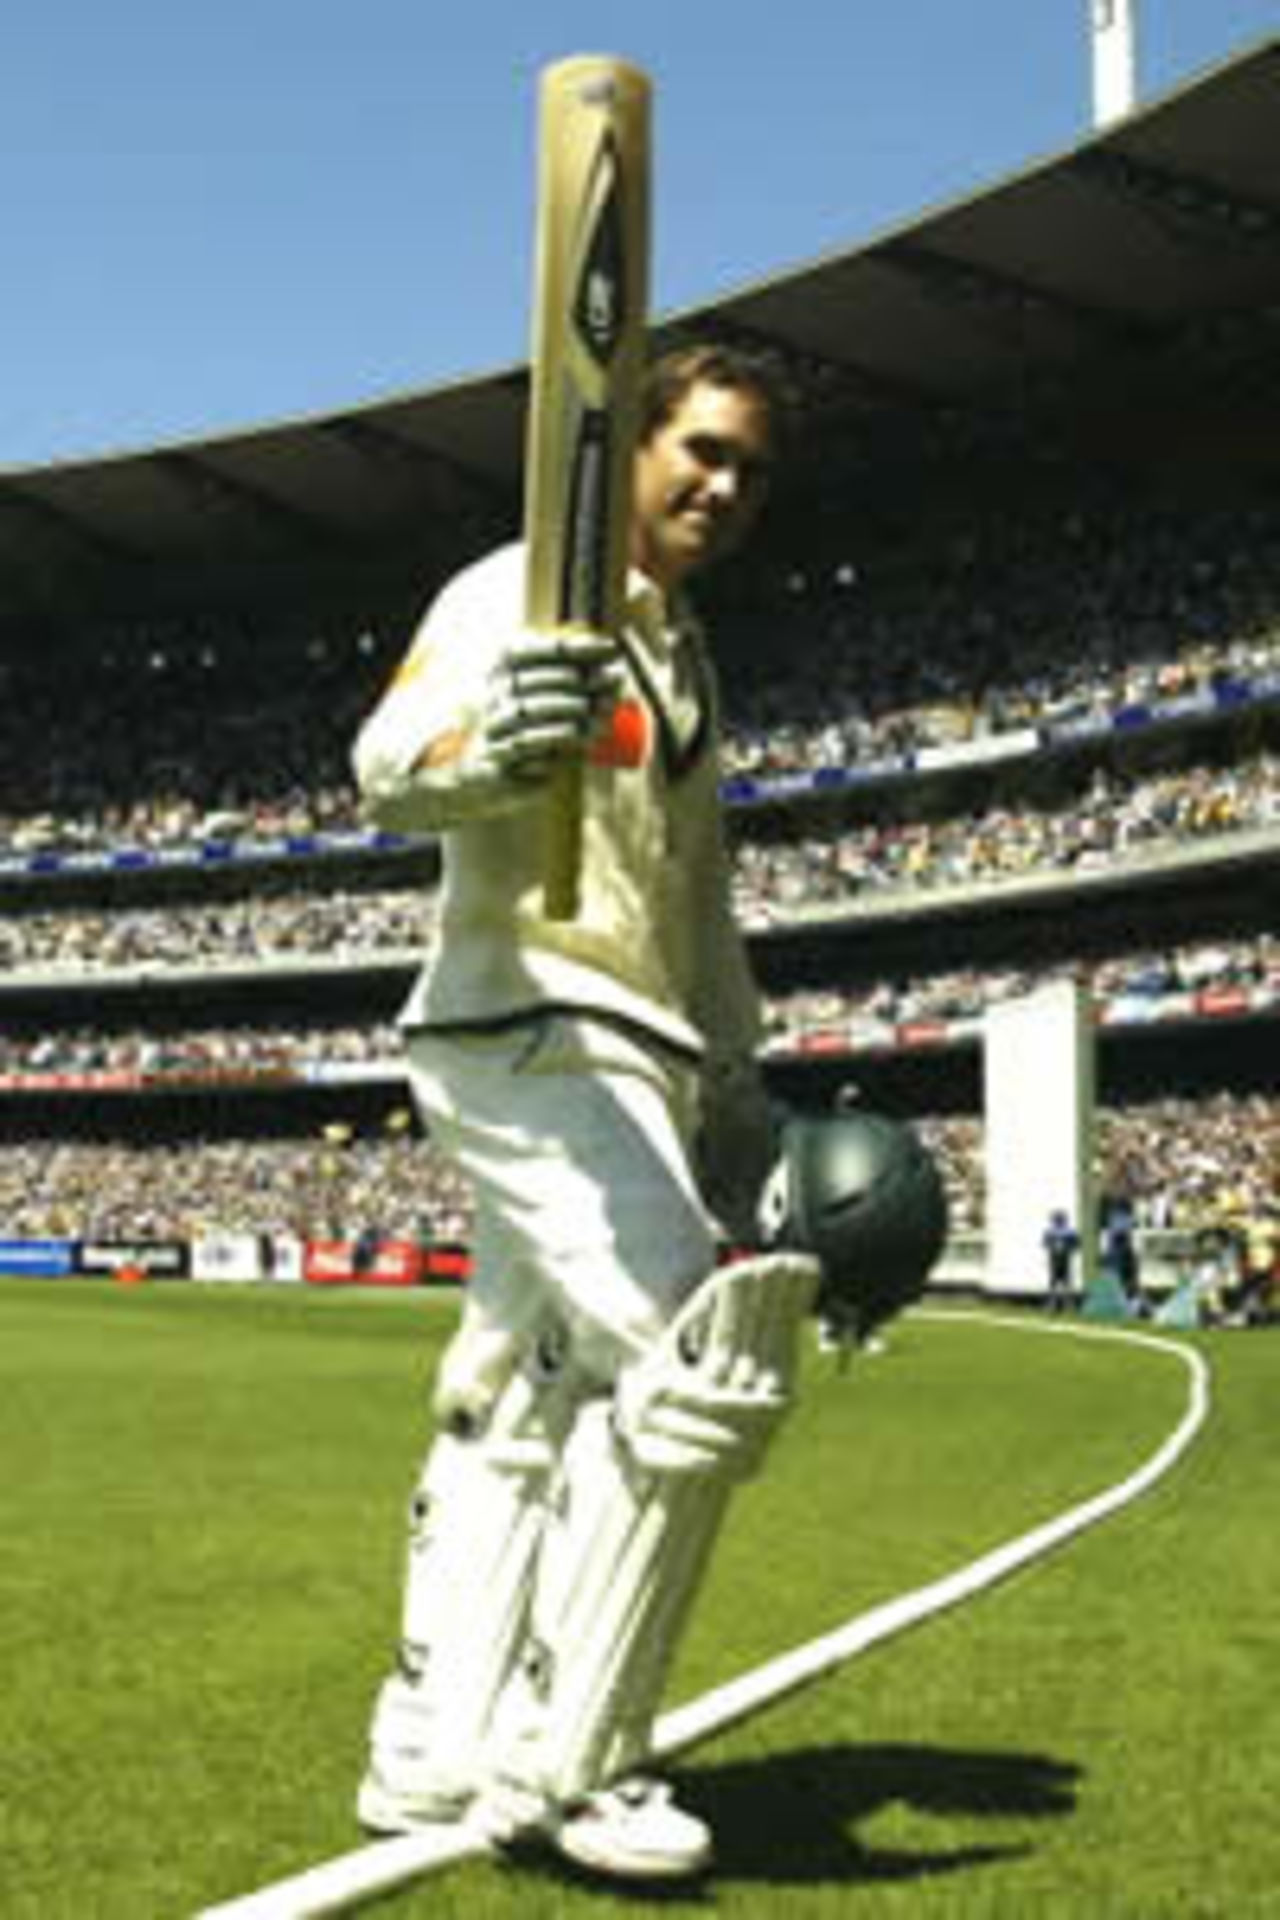 MELBOURNE - DECEMBER 27: Justin Langer of Australia leaves the field after making 250 runs during the second day of the Fourth Ashes Test between Australia and England at the Melbourne Cricket Ground in Melbourne, Australia on December 27, 2002.